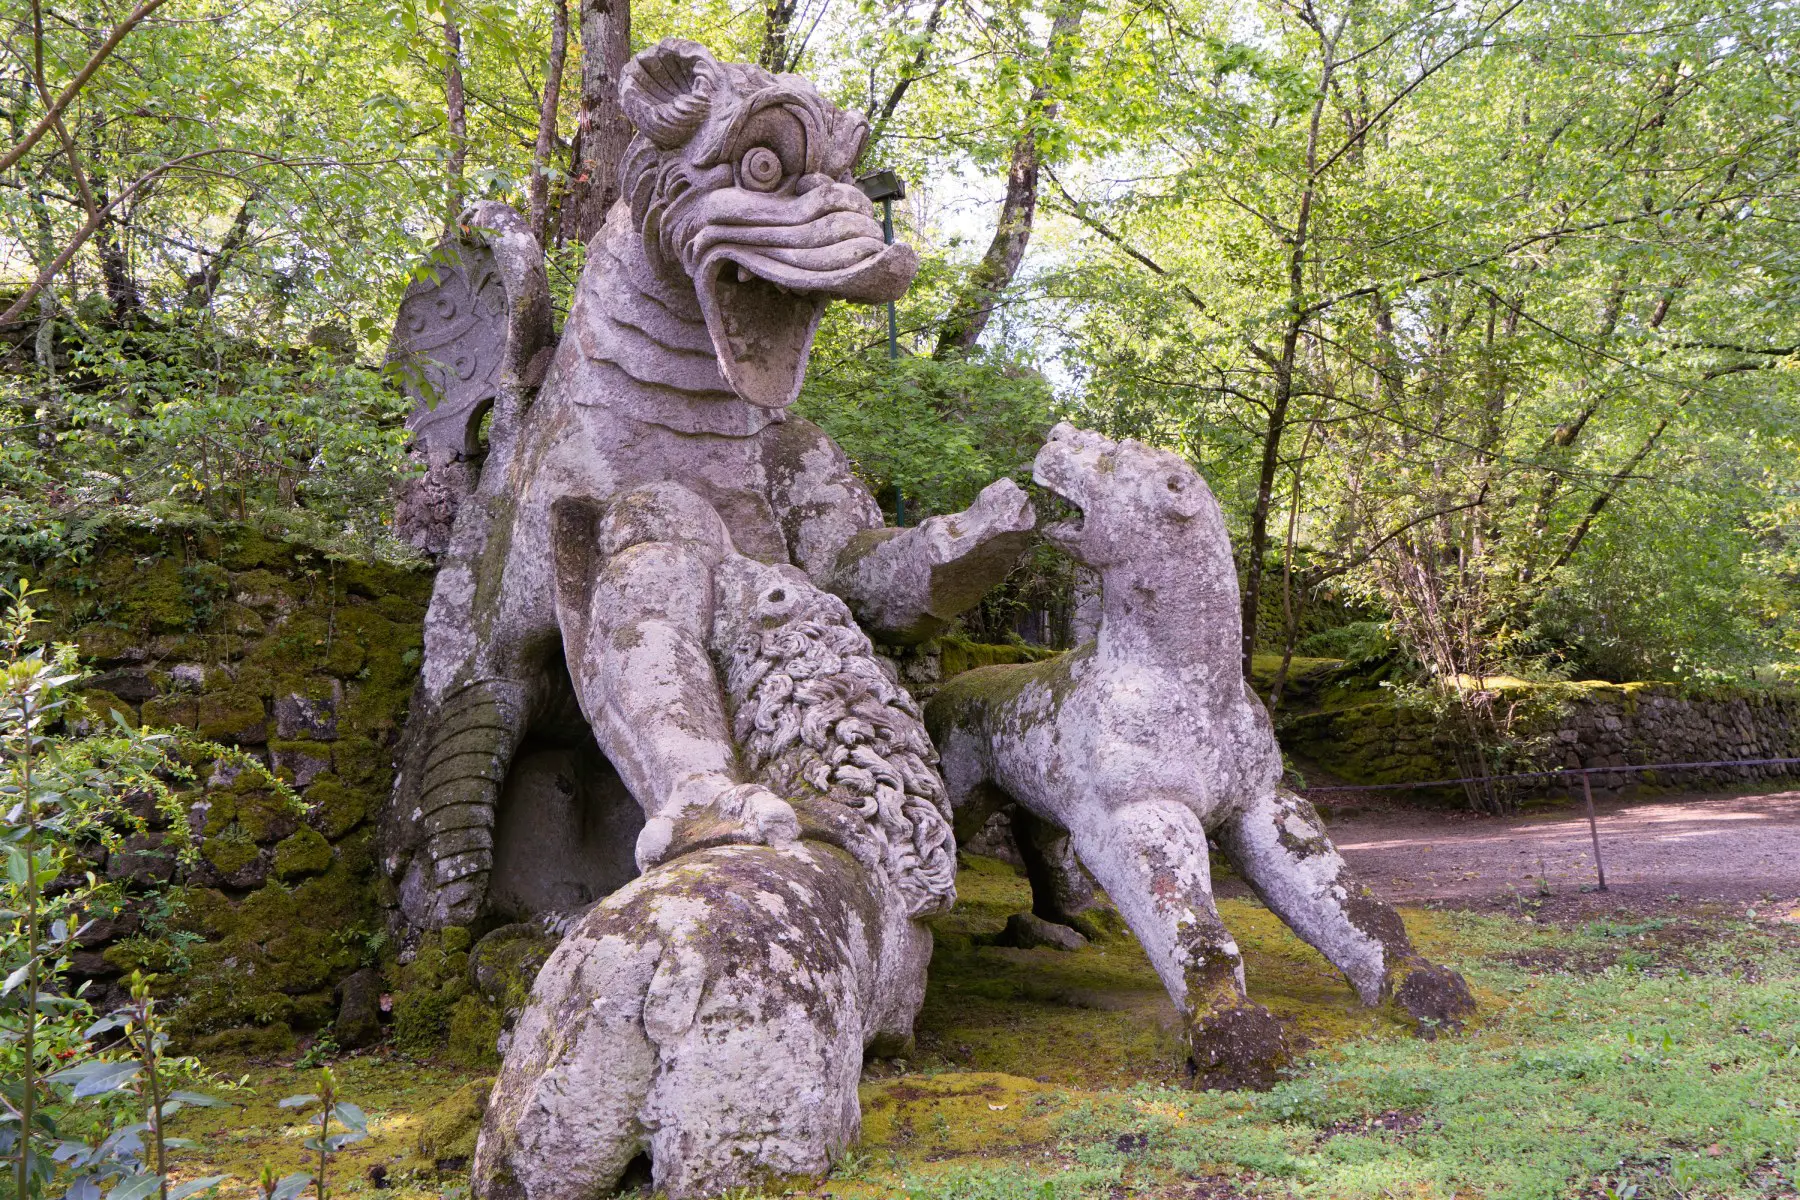 A large stone statue of a dragon in a forest at Sacro Bosco garden in Italy